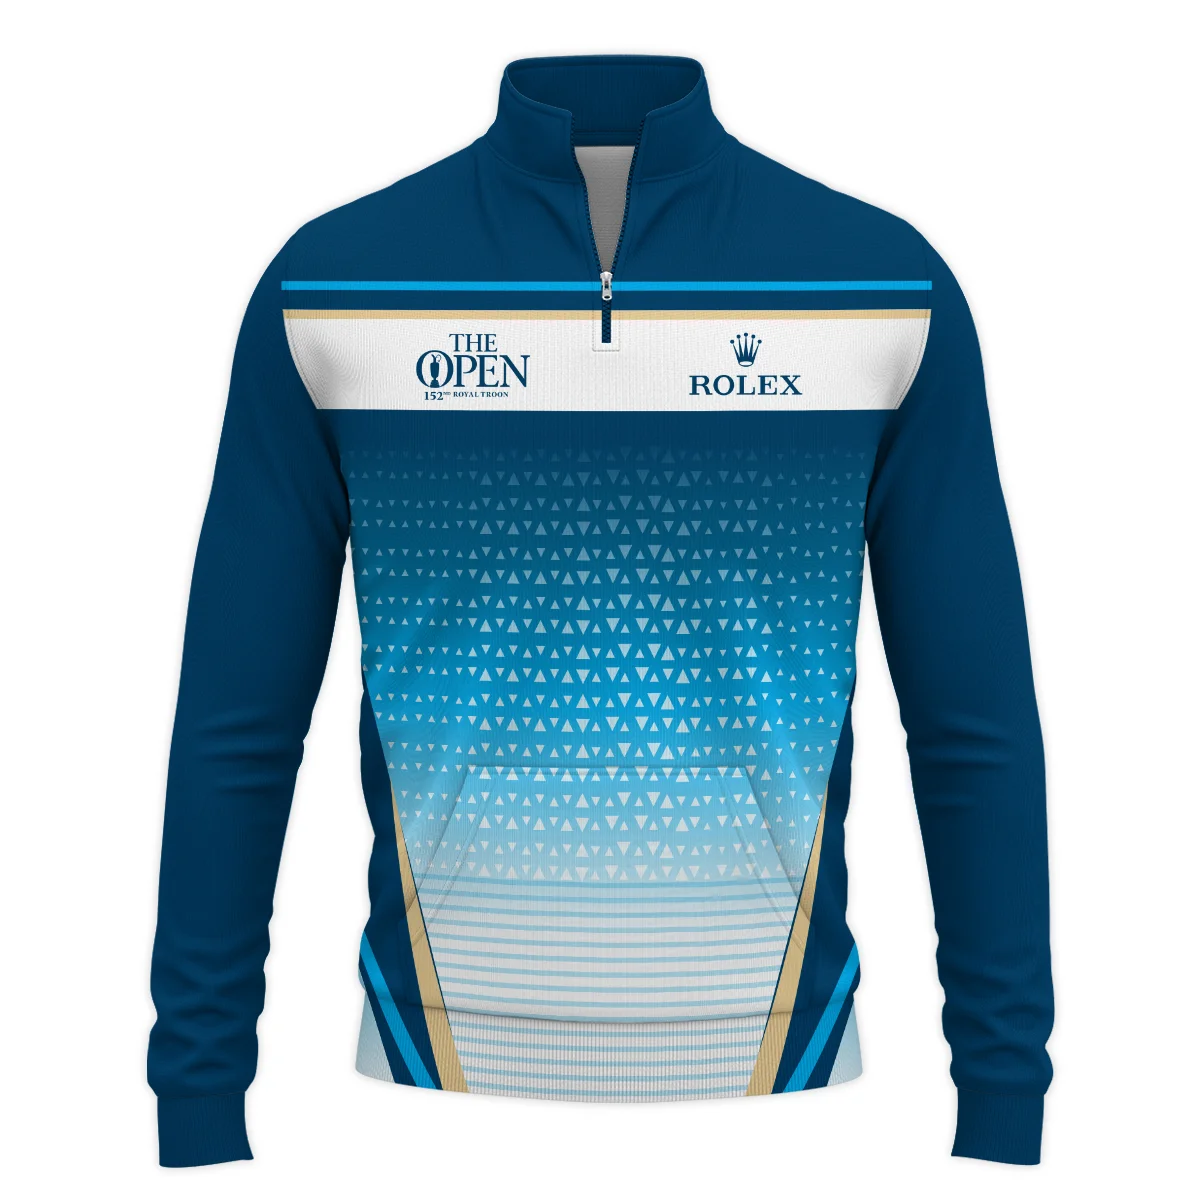 152nd The Open Championship Golf Blue Yellow White Pattern Background Rolex Performance Quarter Zip Sweatshirt With Pockets All Over Prints HOTOP250624A01ROXTS